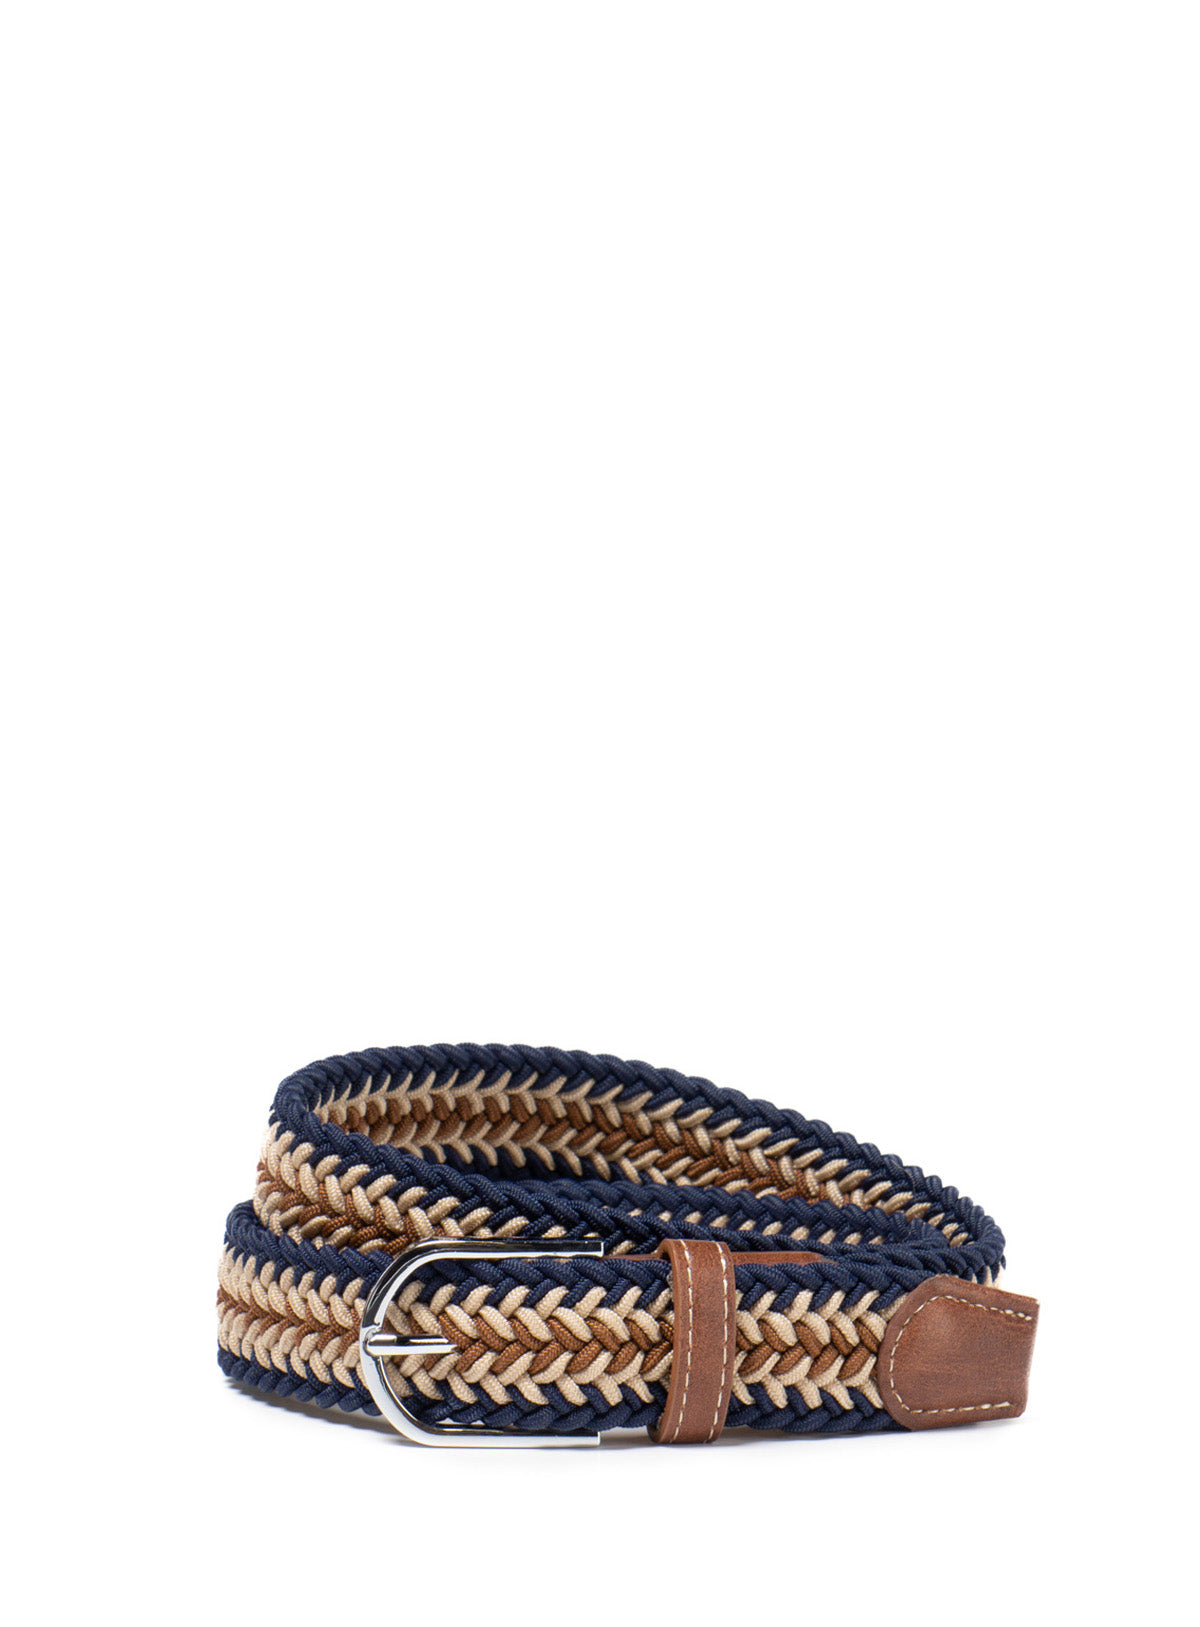 Multi Navy and White - Woven Stretch Belt